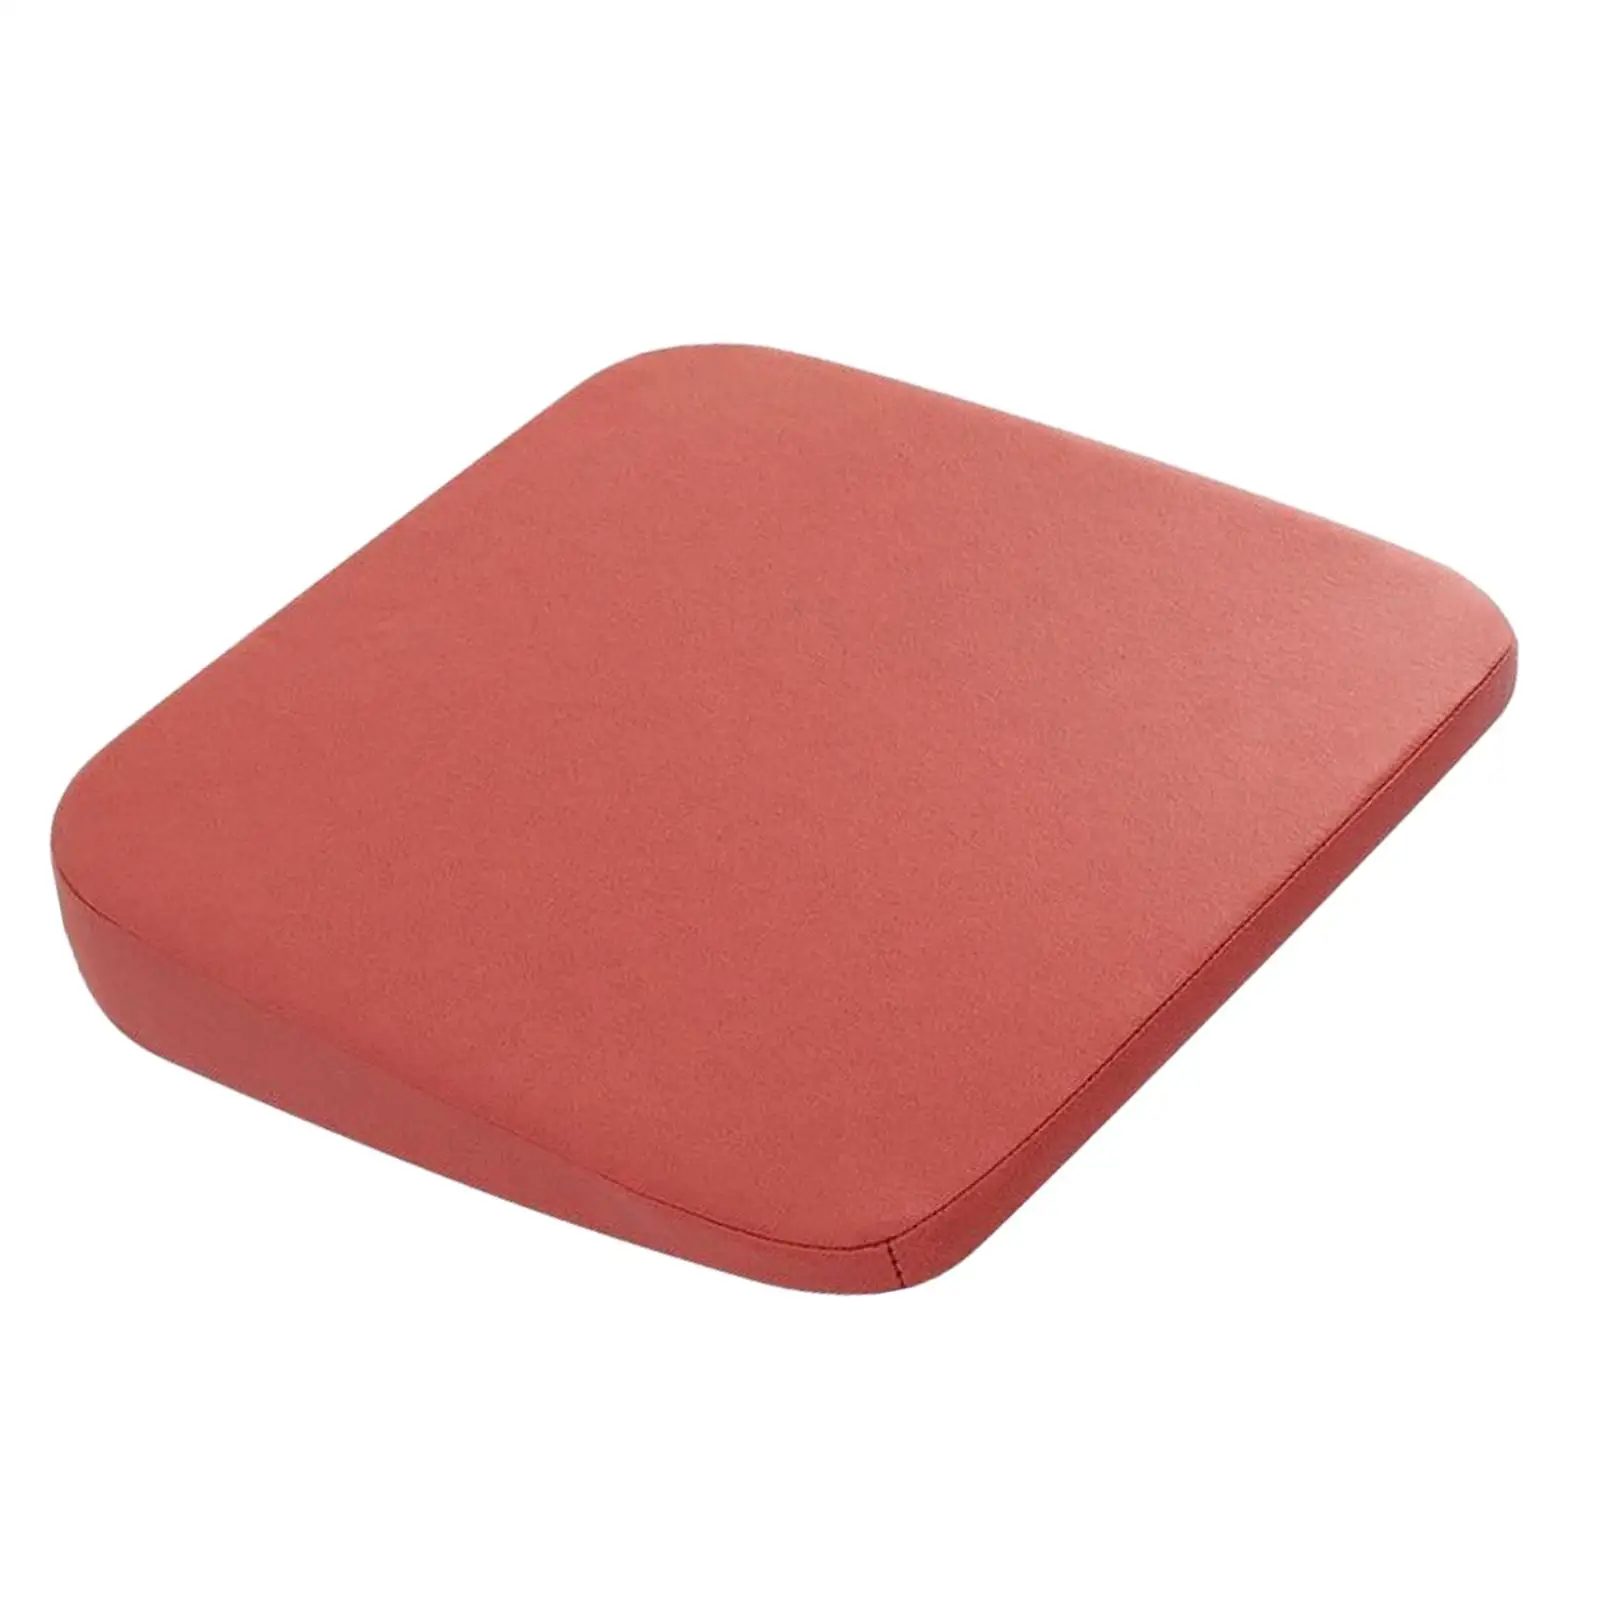 Car Booster Seat Cushion Inclined Plane Automotive Seat Cushion Pad Car Seat Pad Car Seat Cushion for Car Trucks Office Home